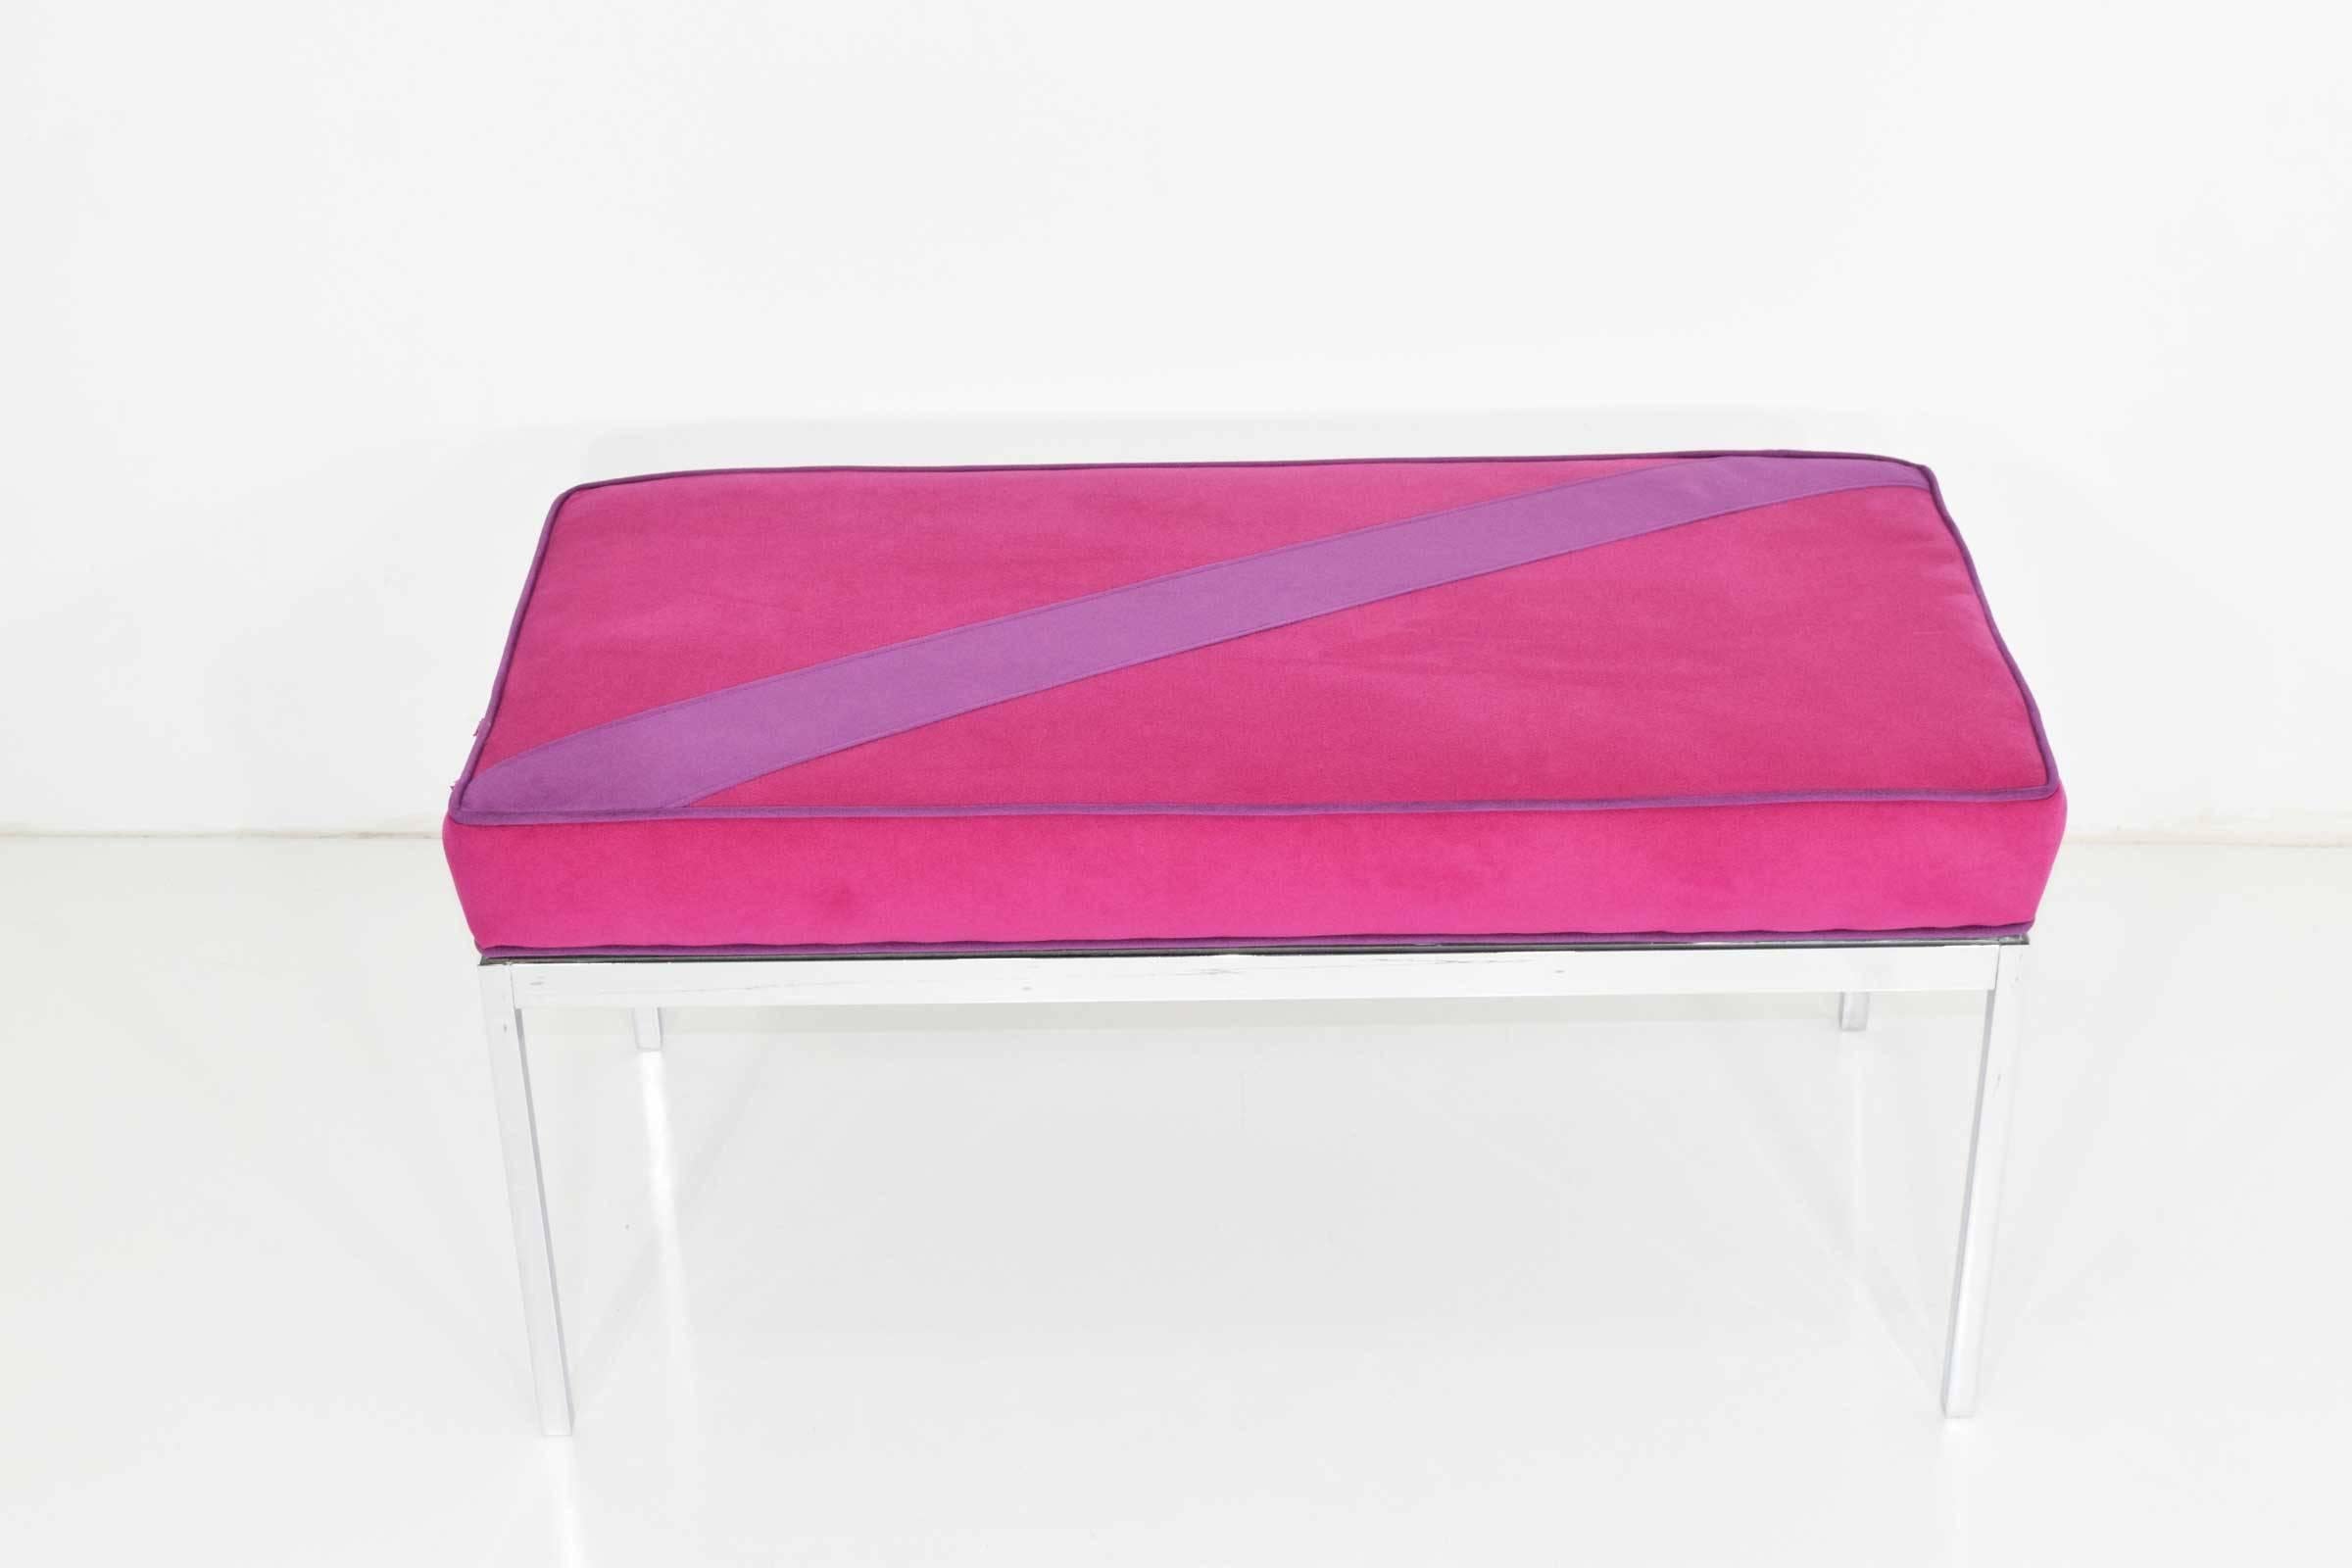 Bench upholstered in a vibrant microsuede. Can be reupholstered if desired.